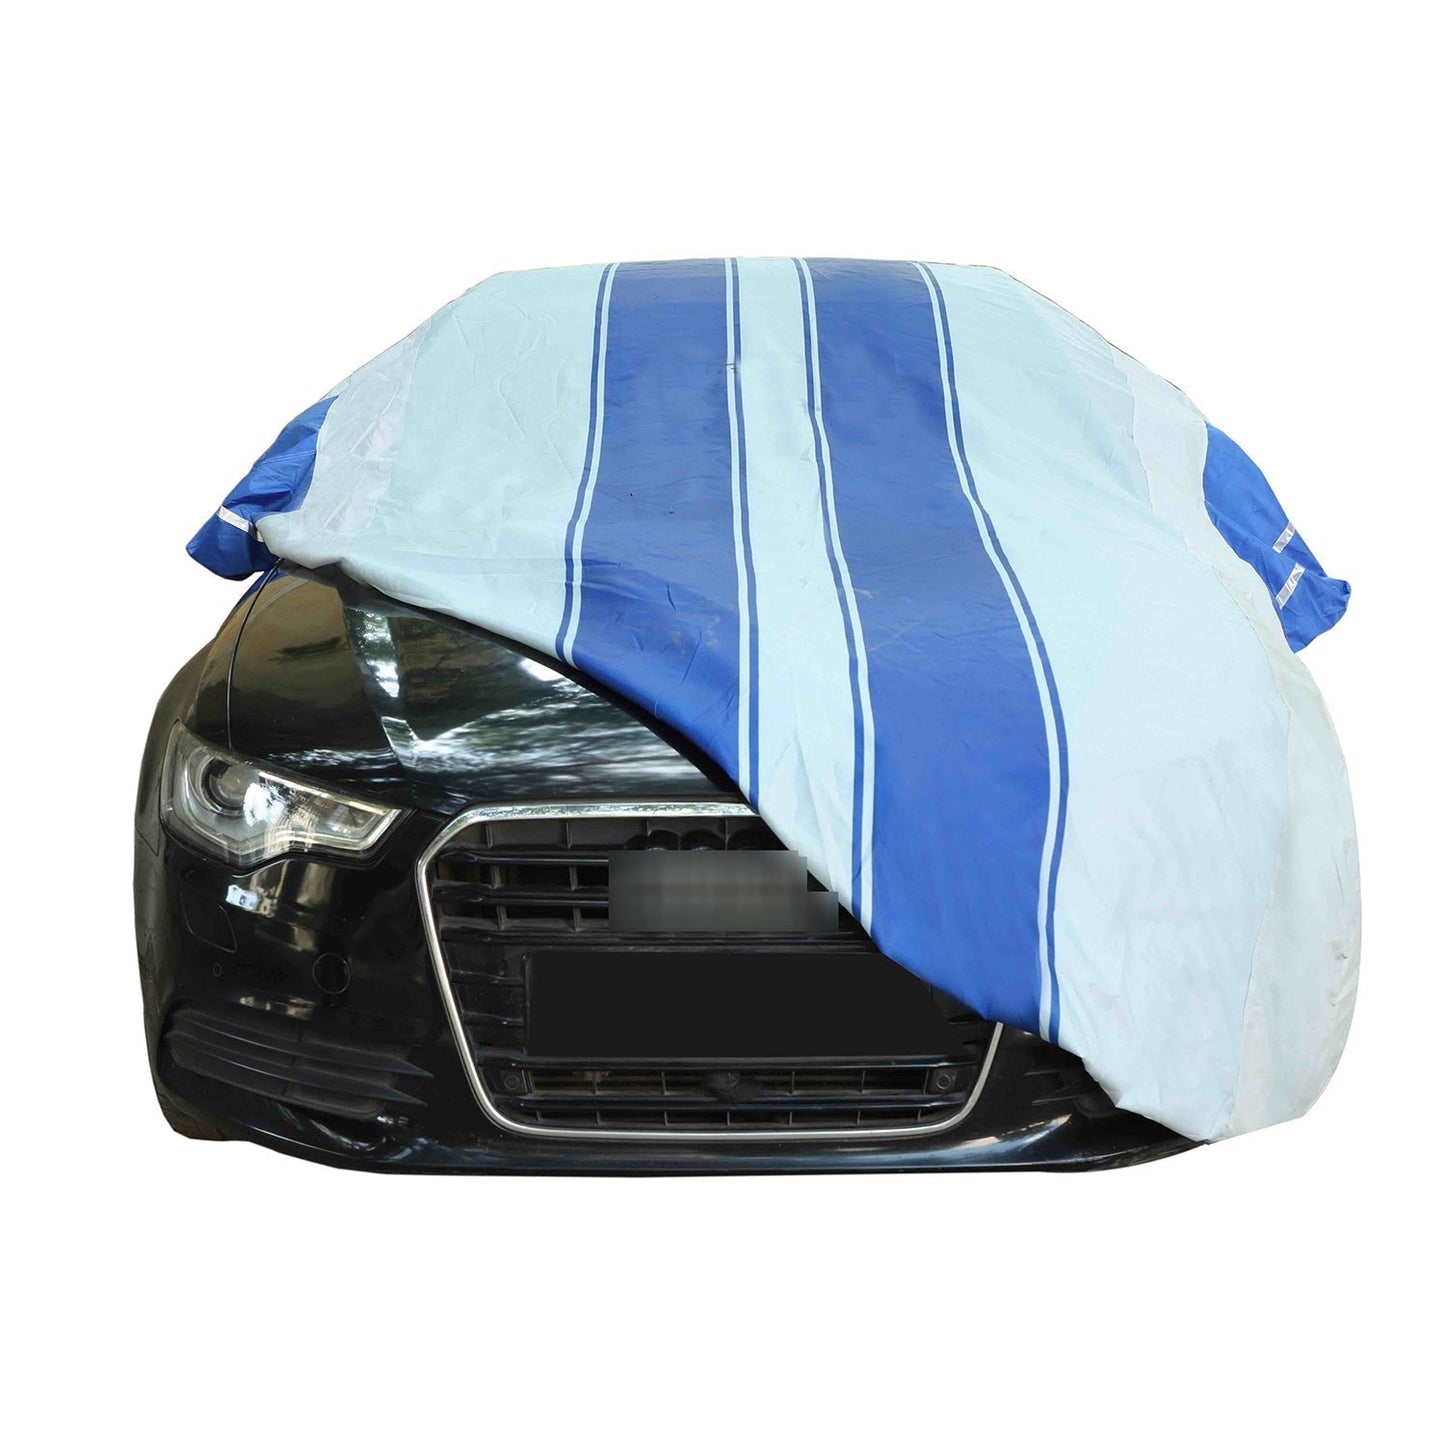 Oshotto 100% Blue dustproof and Water Resistant Car Body Cover with Mirror Pockets For Isuzu MU7